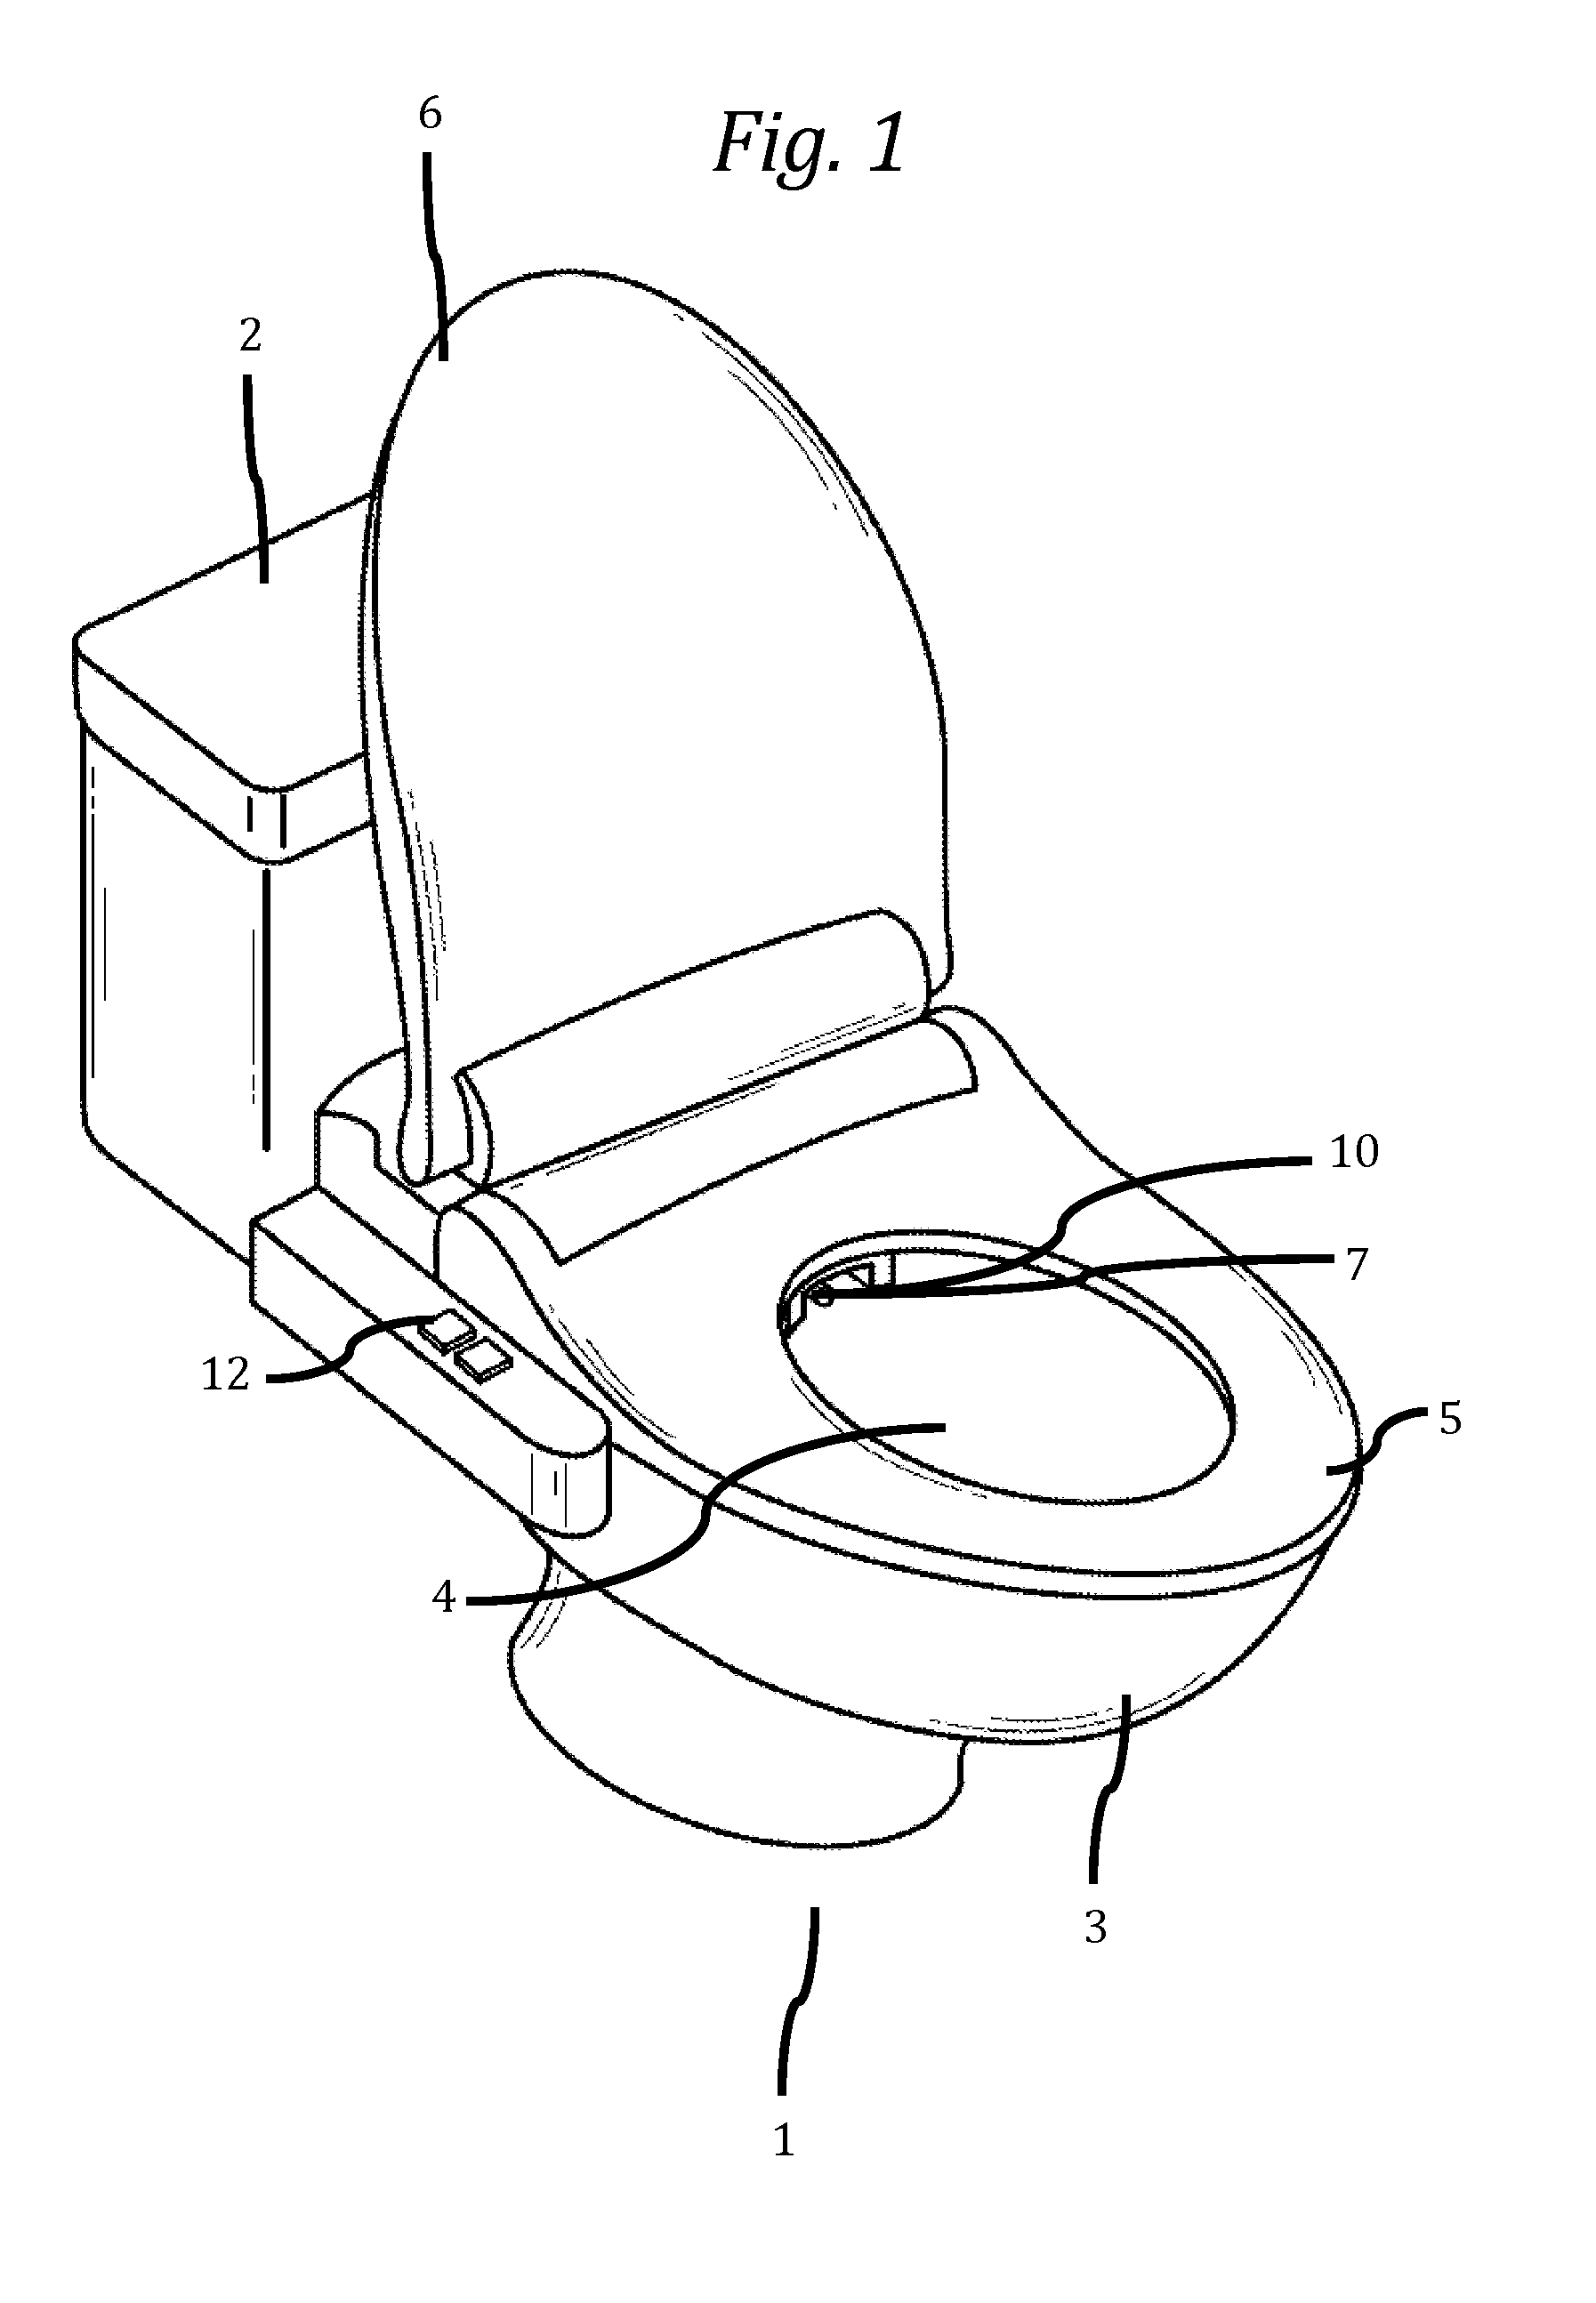 Electronic automatically adjusting bidet with visual object recognition software